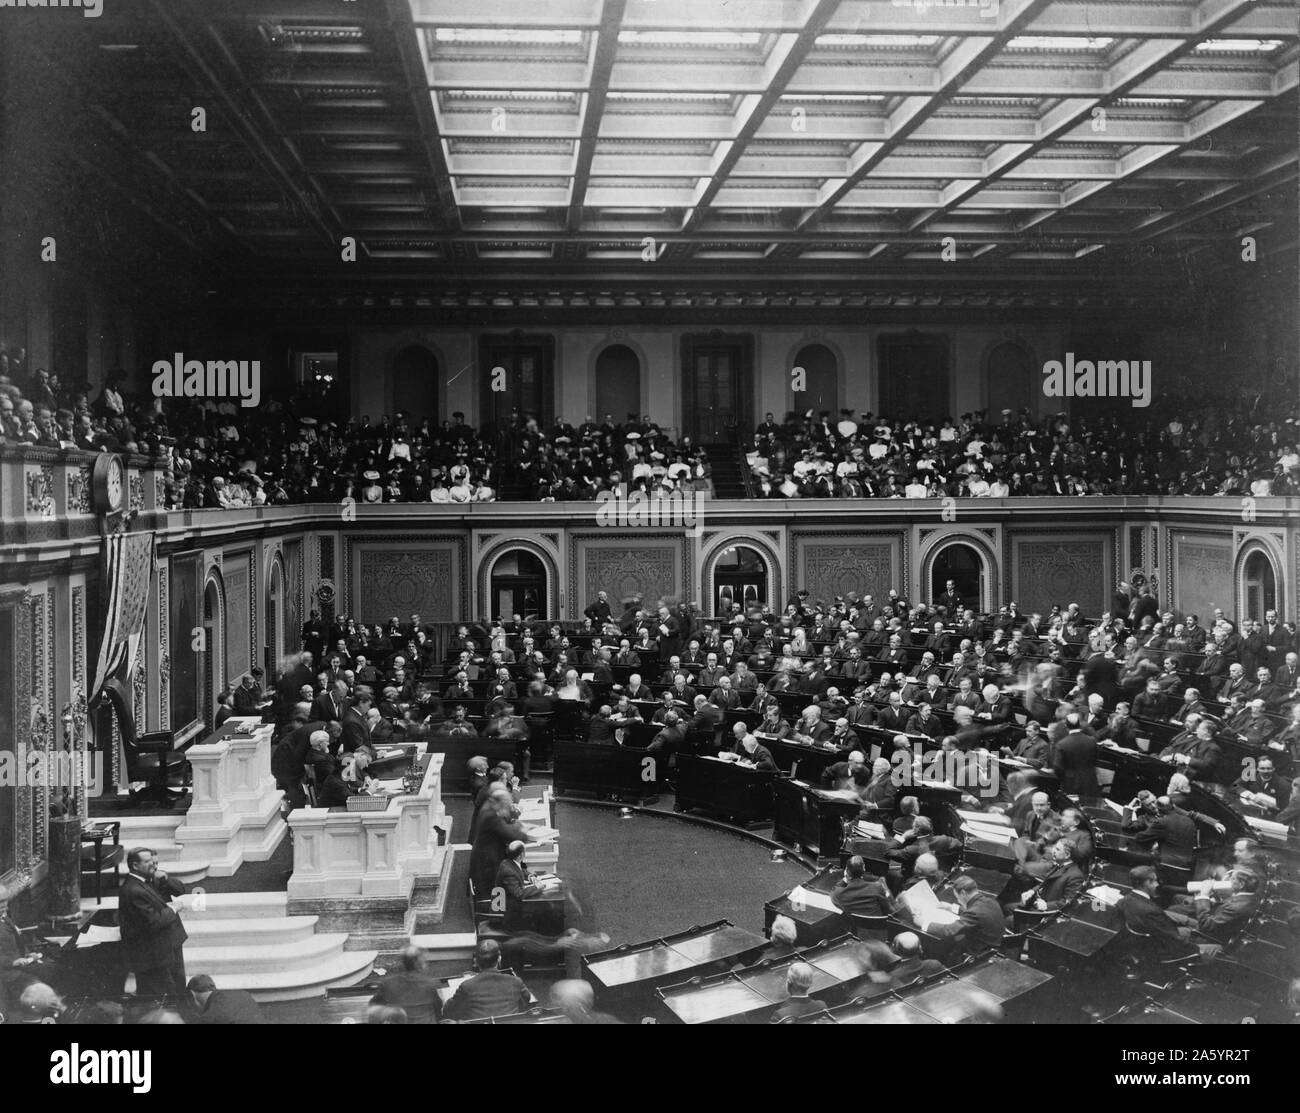 Photographic print of the opening ceremonies of the U.S. 59th Congress. Photographed by Frances Benjamin Johnston (1864-1952). Dated 1906 Stock Photo